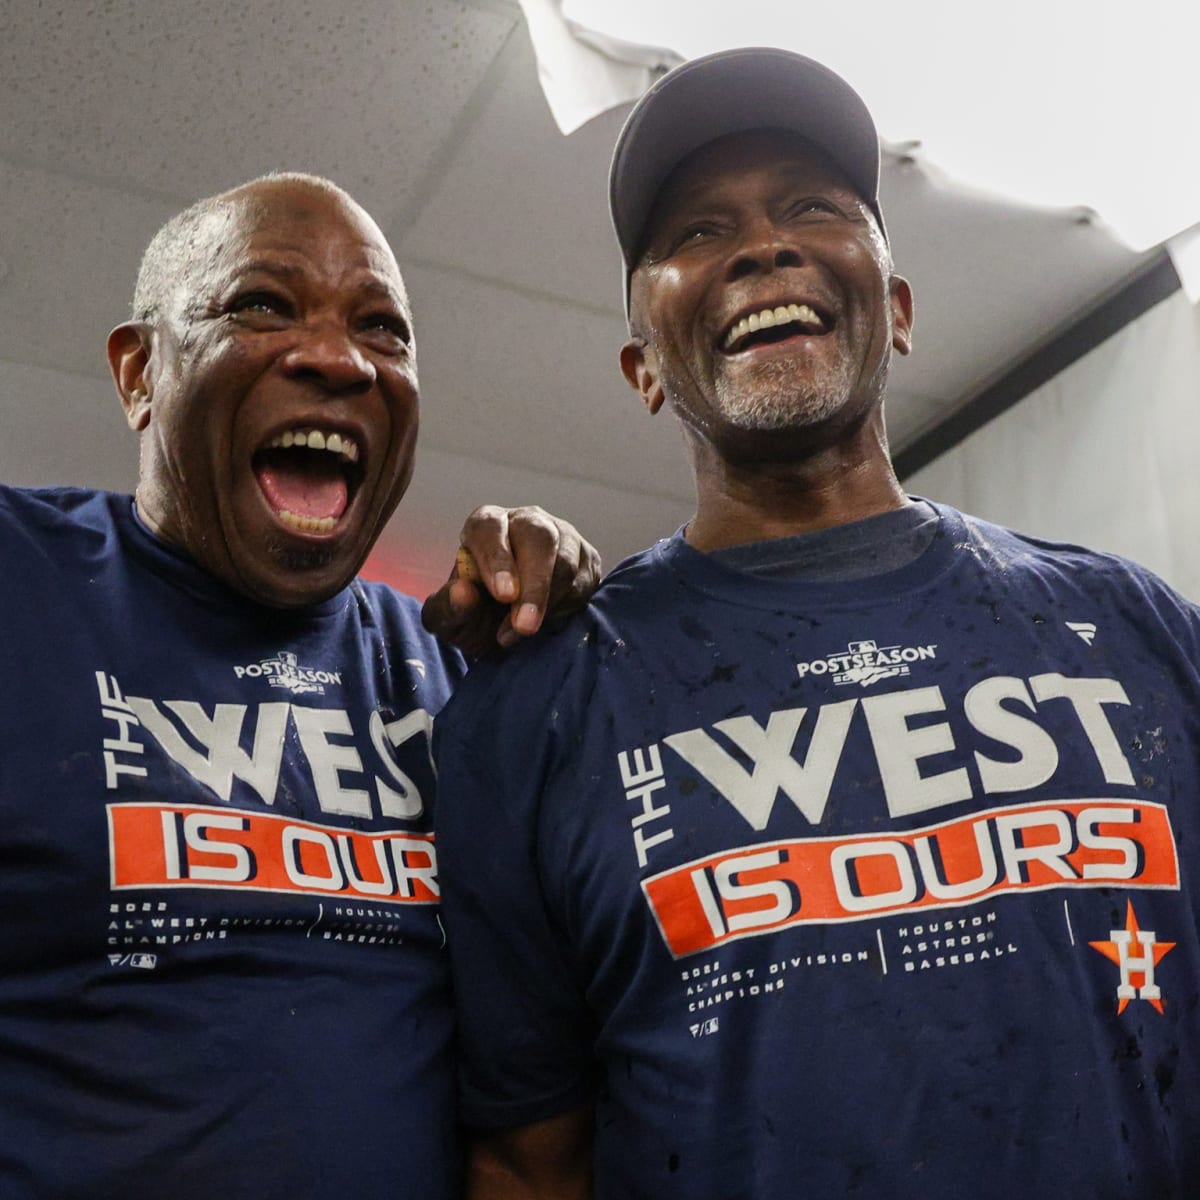 Houston Astros Clinch American League West, First Round Playoff